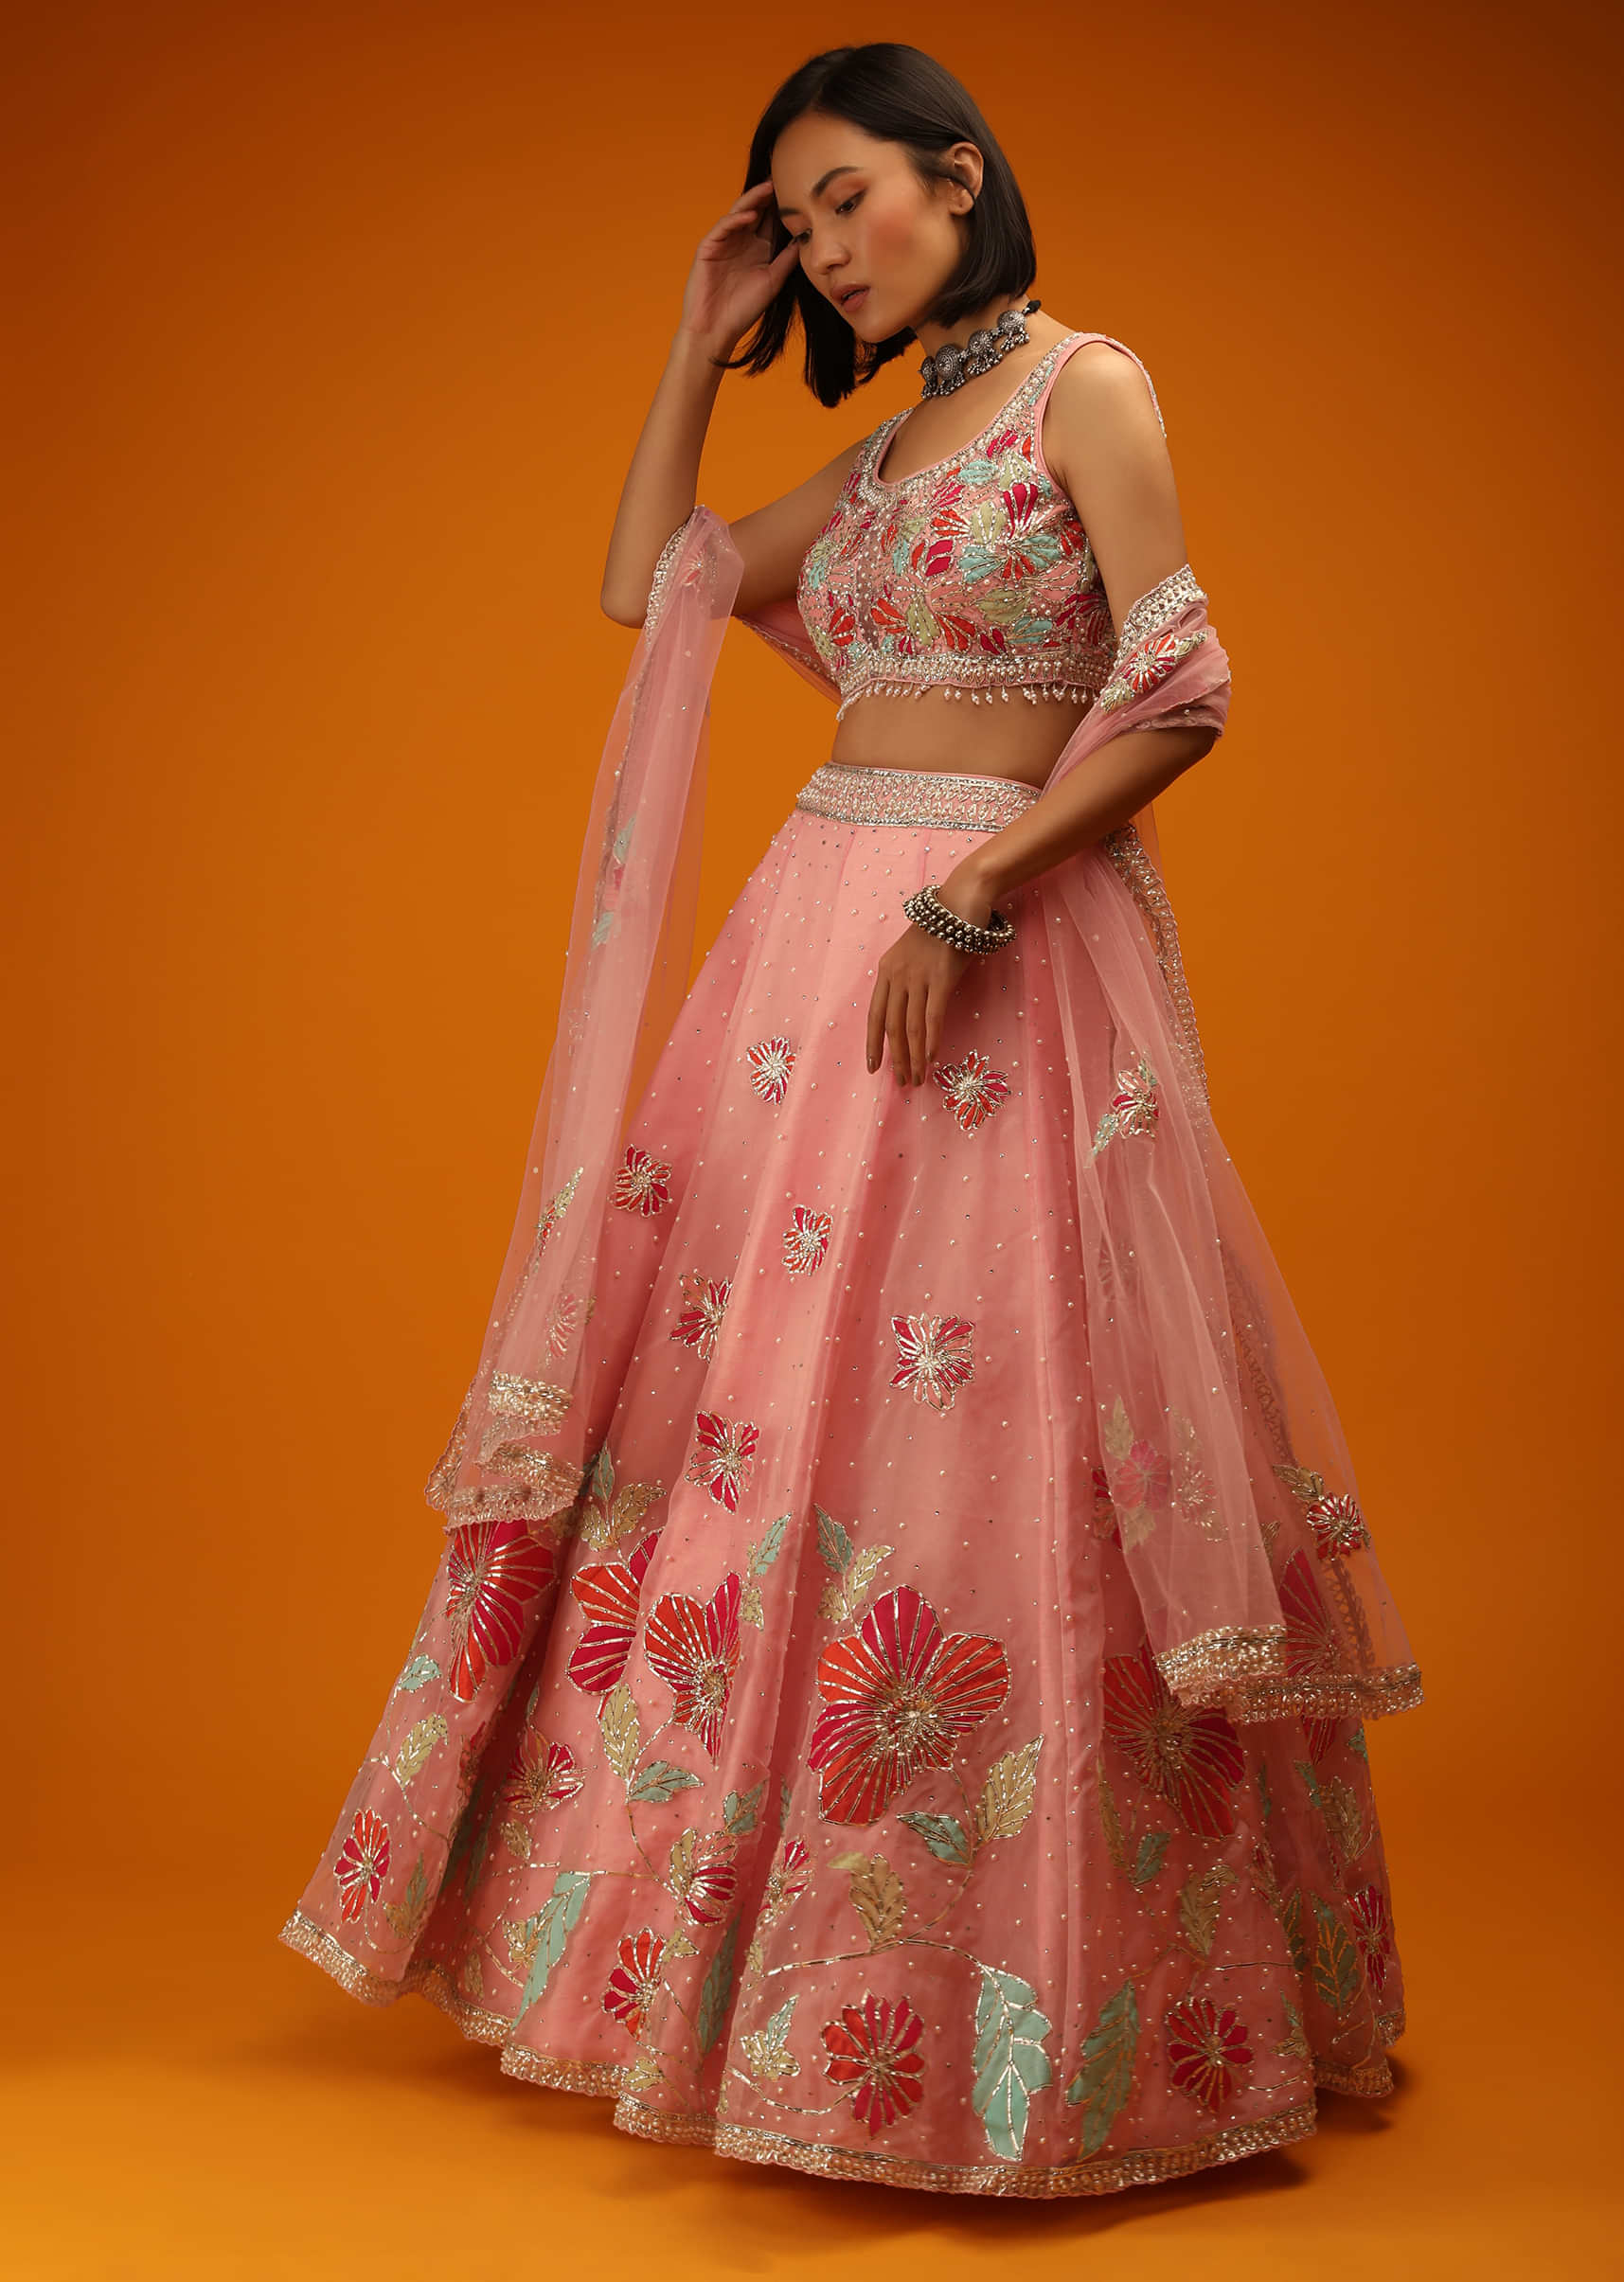 Rose Pink Lehenga Choli In Organza With Multi Colored Floral Applique Embroidery And Moti Accents